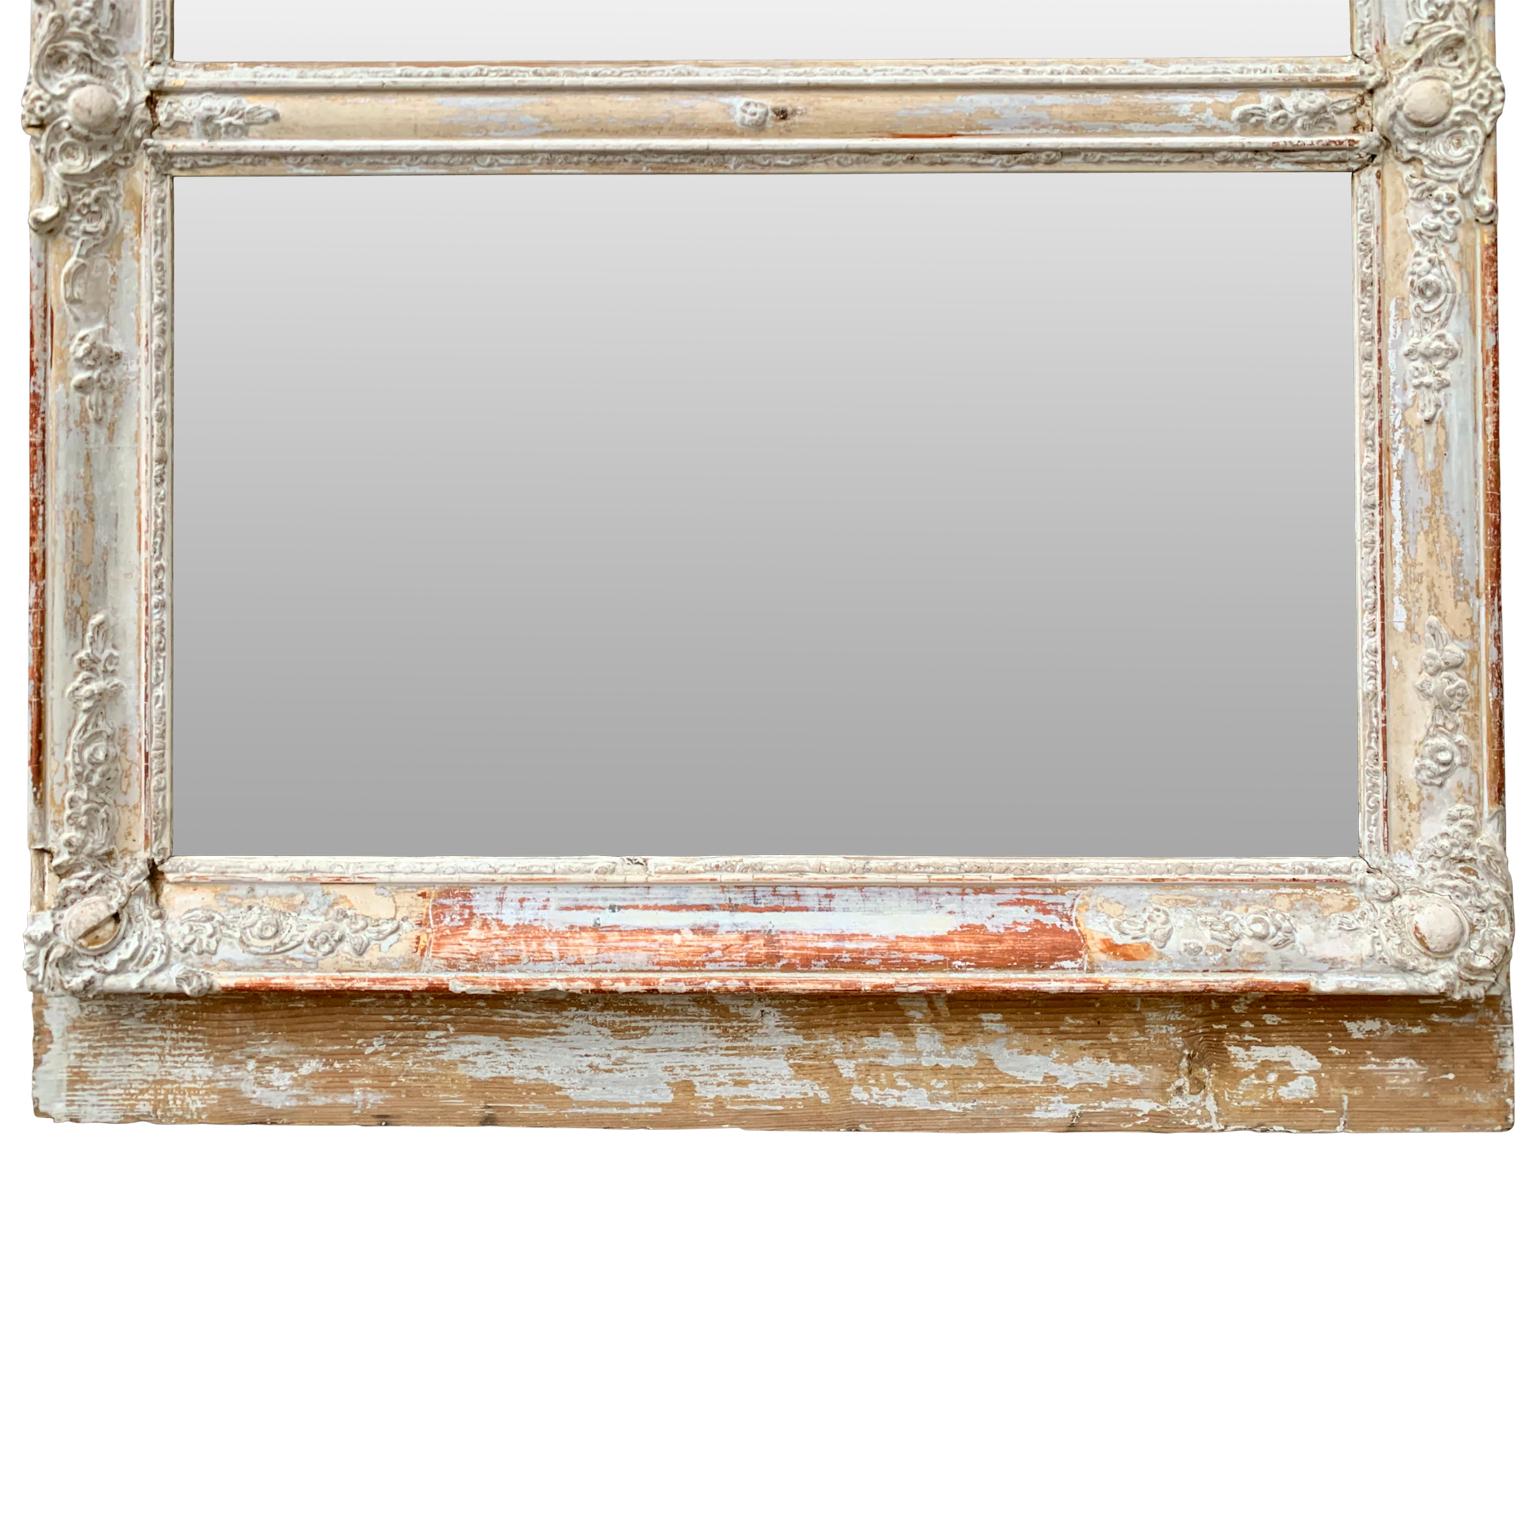 An early 19th century French Trumeau mirror in its original frame and mirror glass.
 